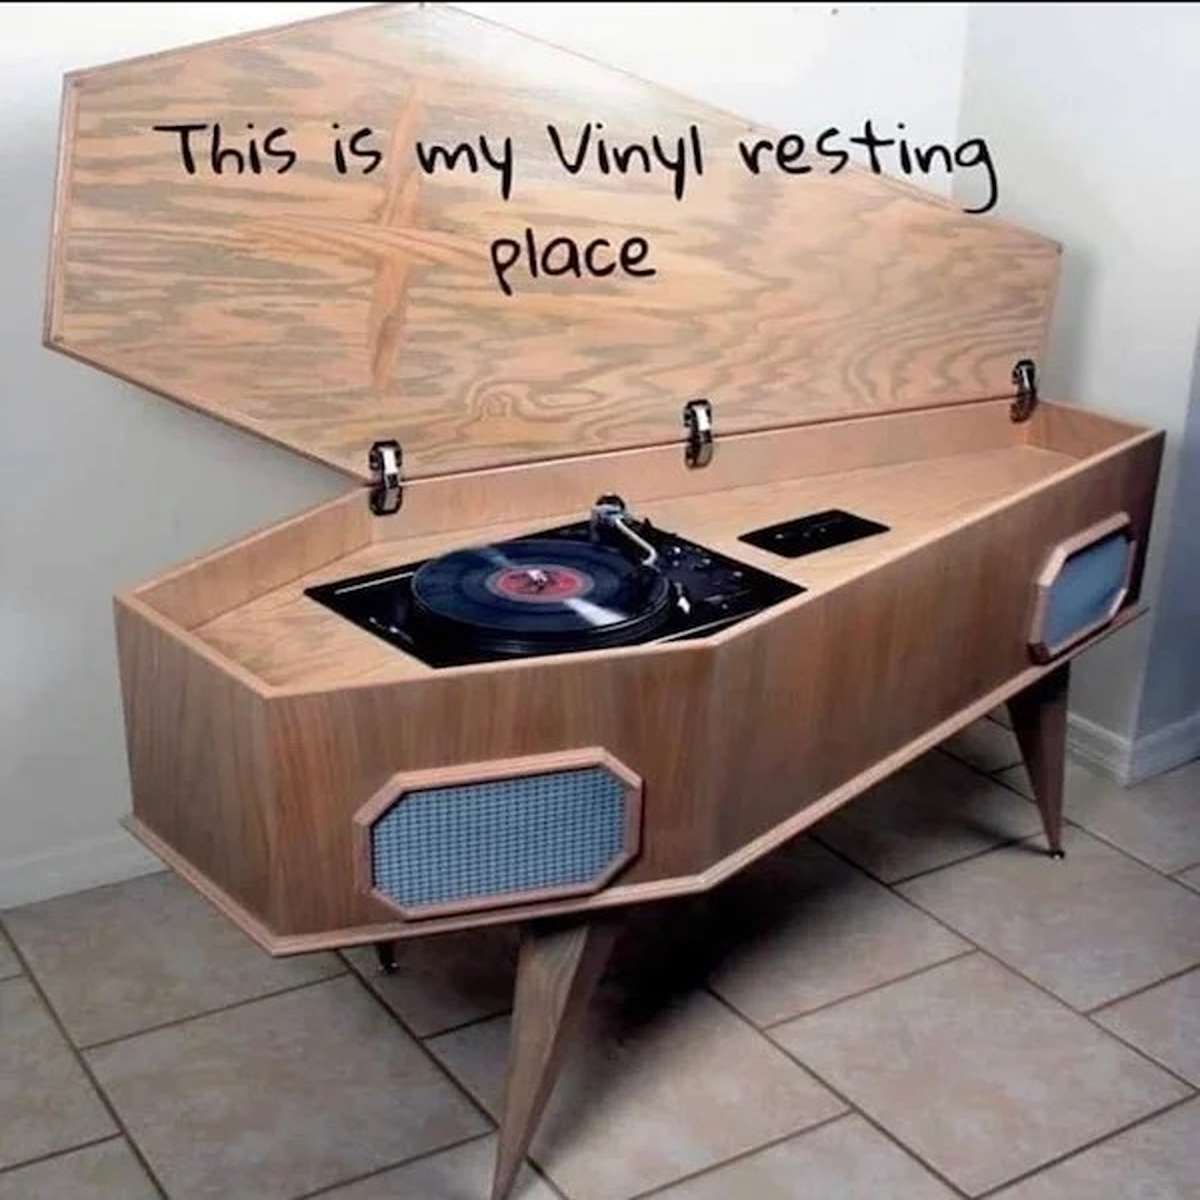 fresh memes - my vinyl resting place - This is my Vinyl resting place 20